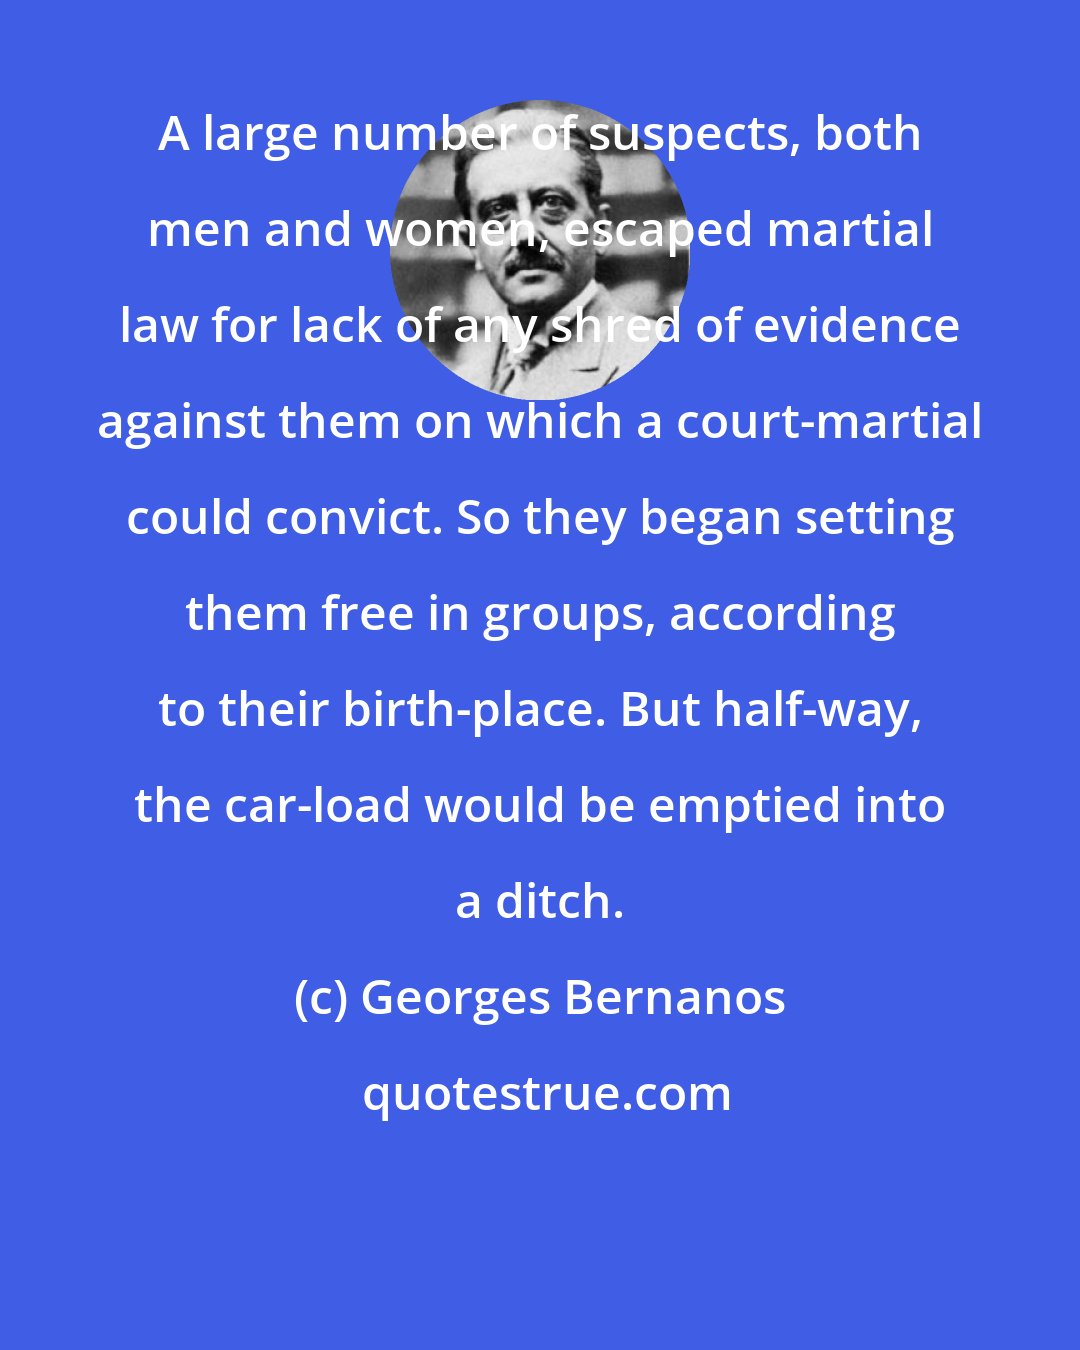 Georges Bernanos: A large number of suspects, both men and women, escaped martial law for lack of any shred of evidence against them on which a court-martial could convict. So they began setting them free in groups, according to their birth-place. But half-way, the car-load would be emptied into a ditch.